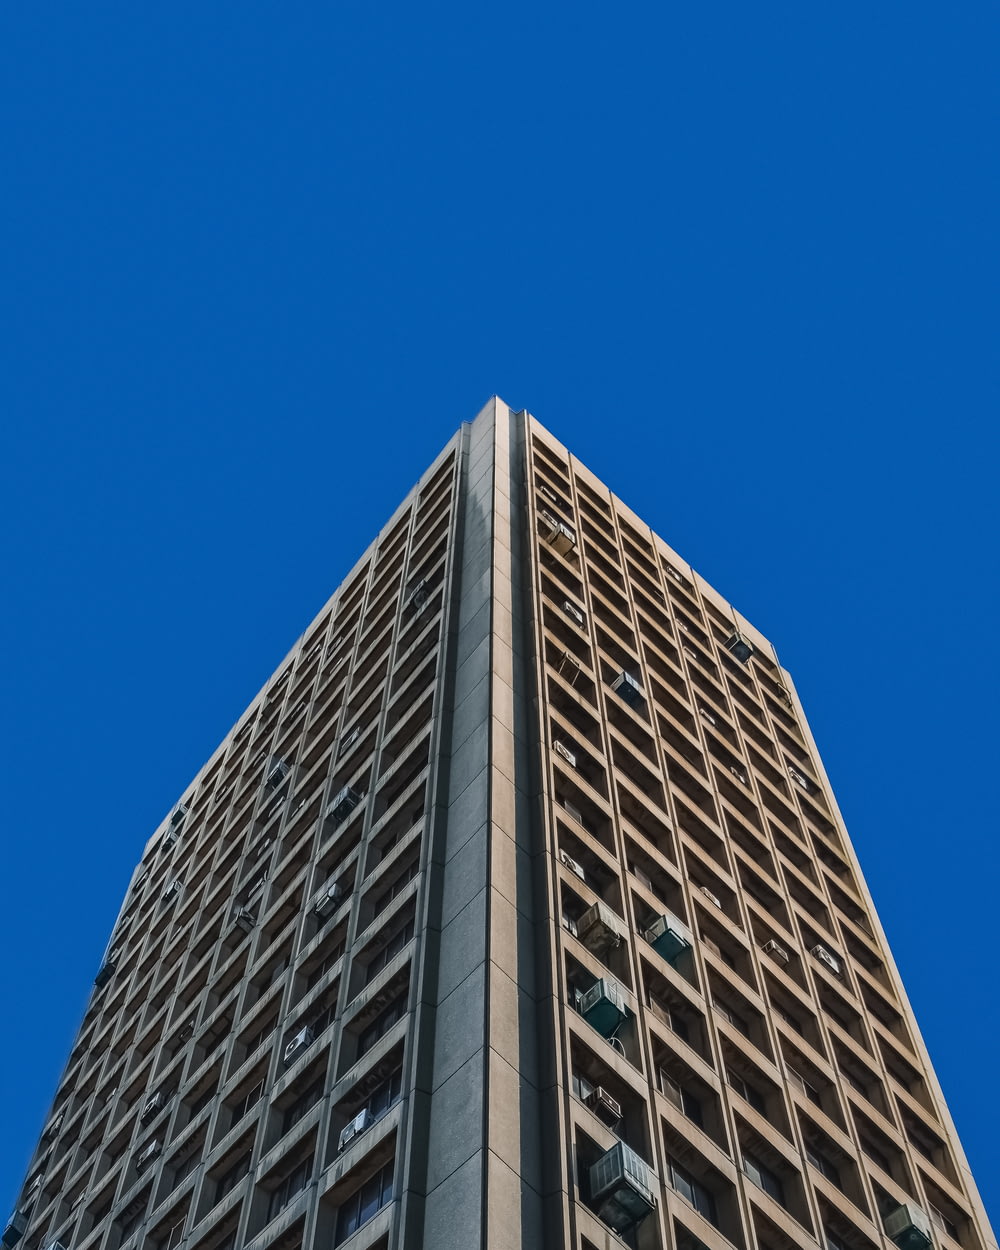 low angle photography of gray concrete building under blue sky during daytime